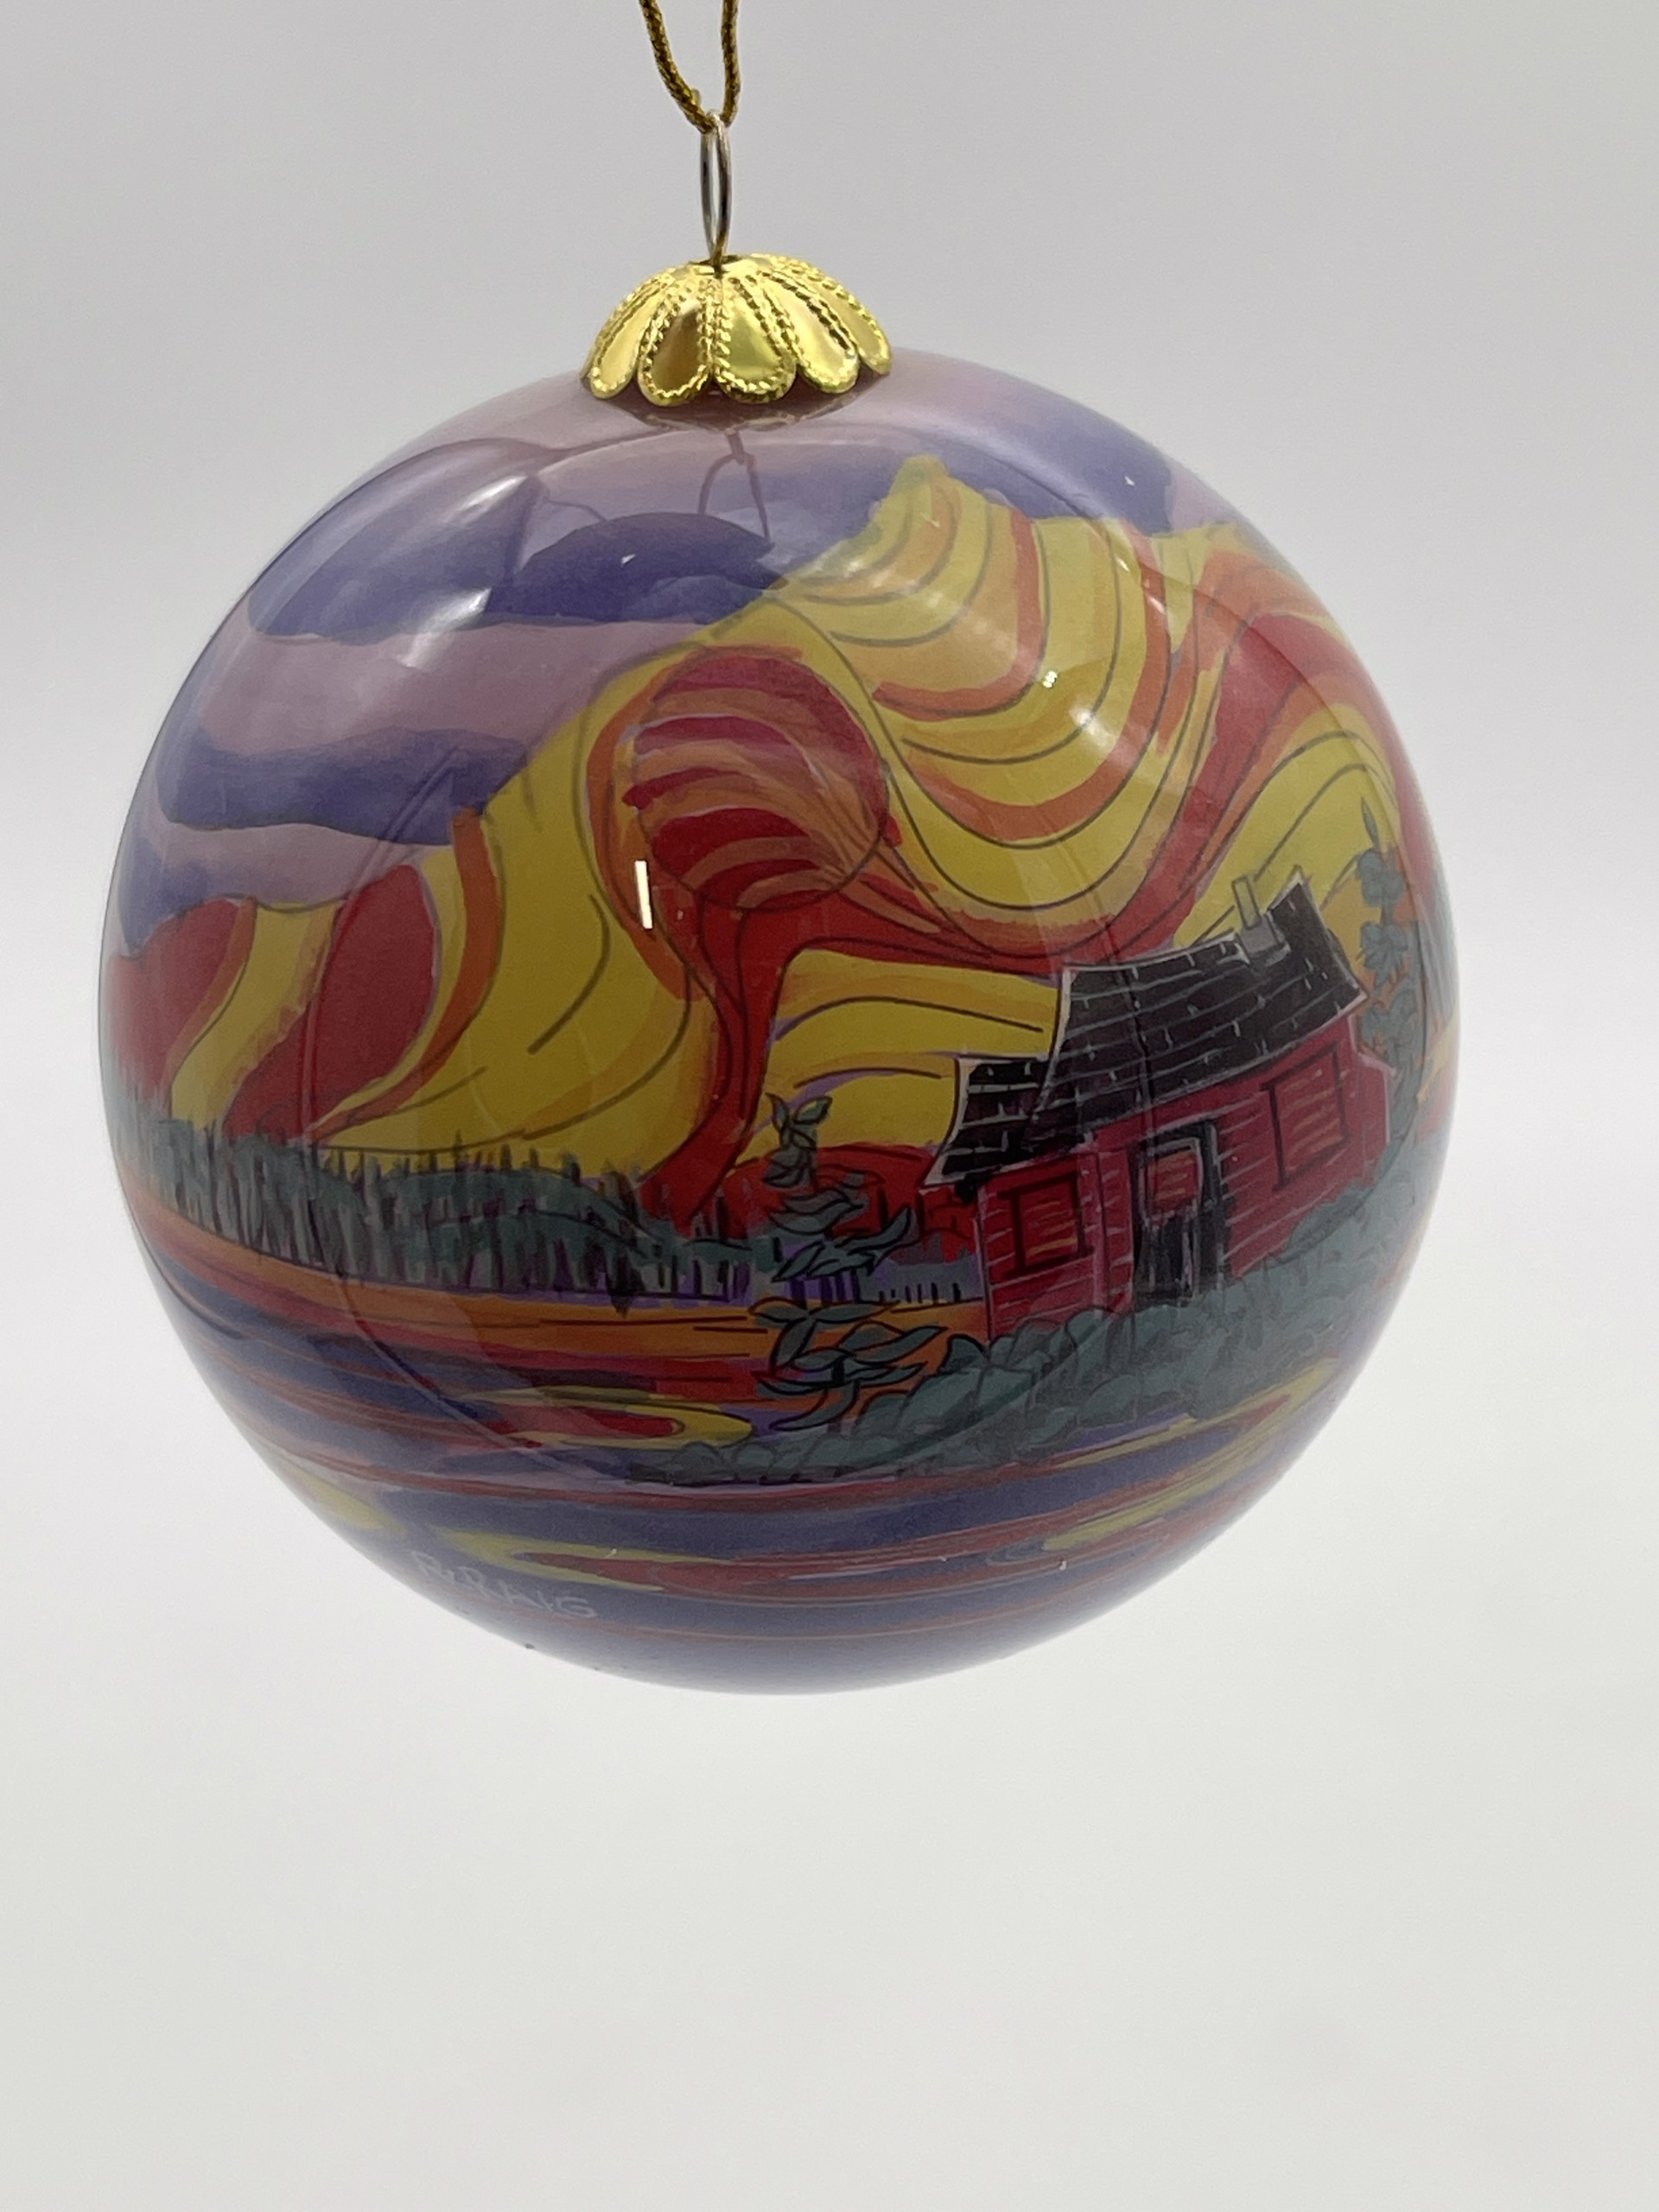 Cabin on the Rocks Ornament by Robbie Craig